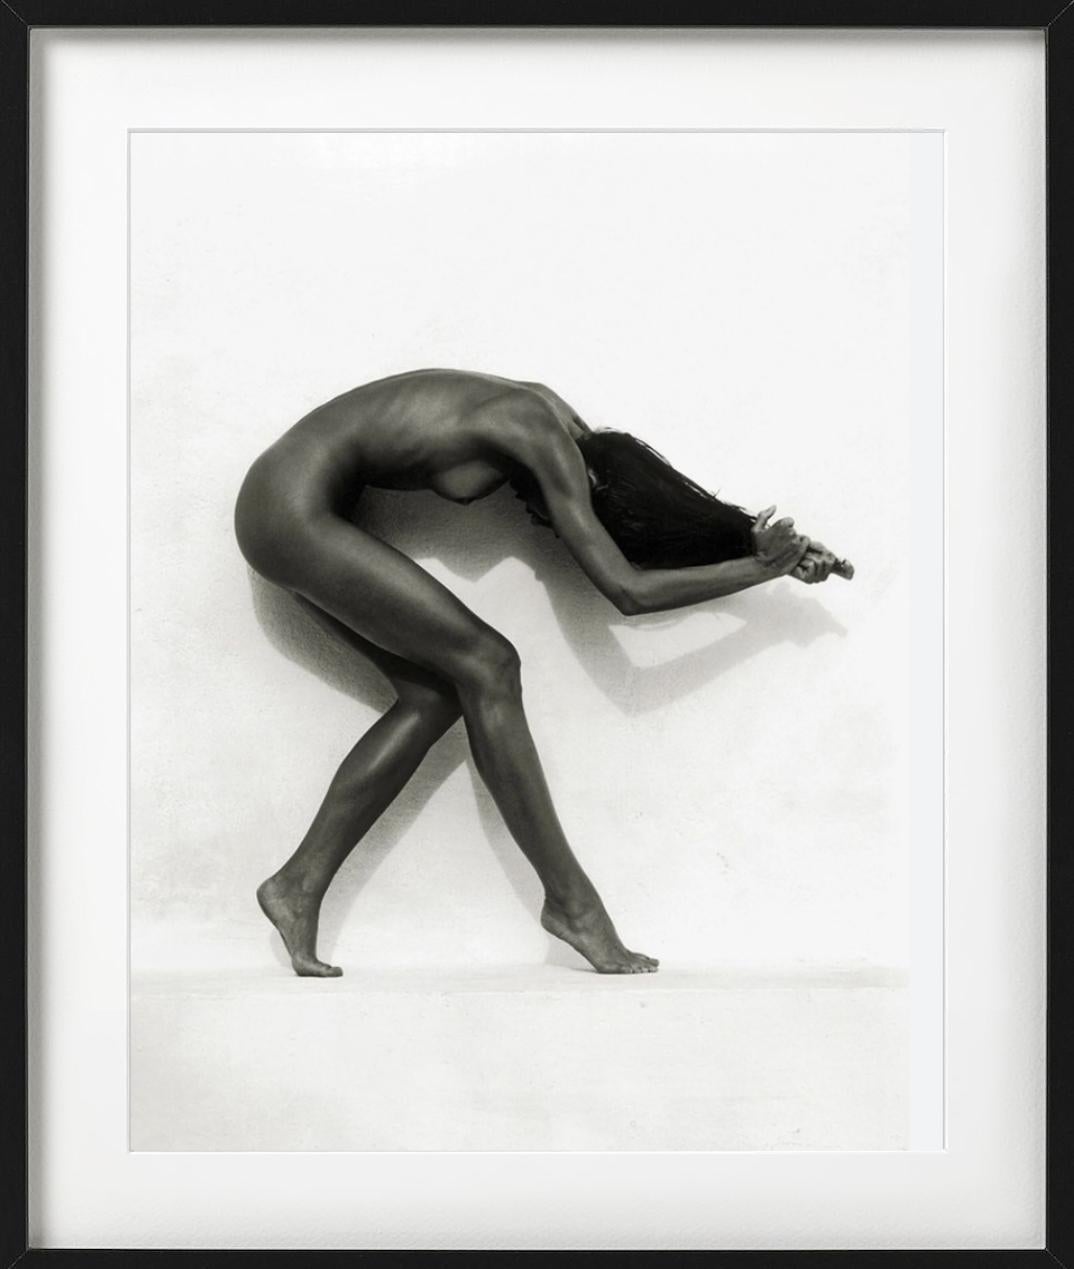 Ulrica, Mykonos - acrobatic nude, fine art photography, 1993 - Photograph by Andreas H. Bitesnich